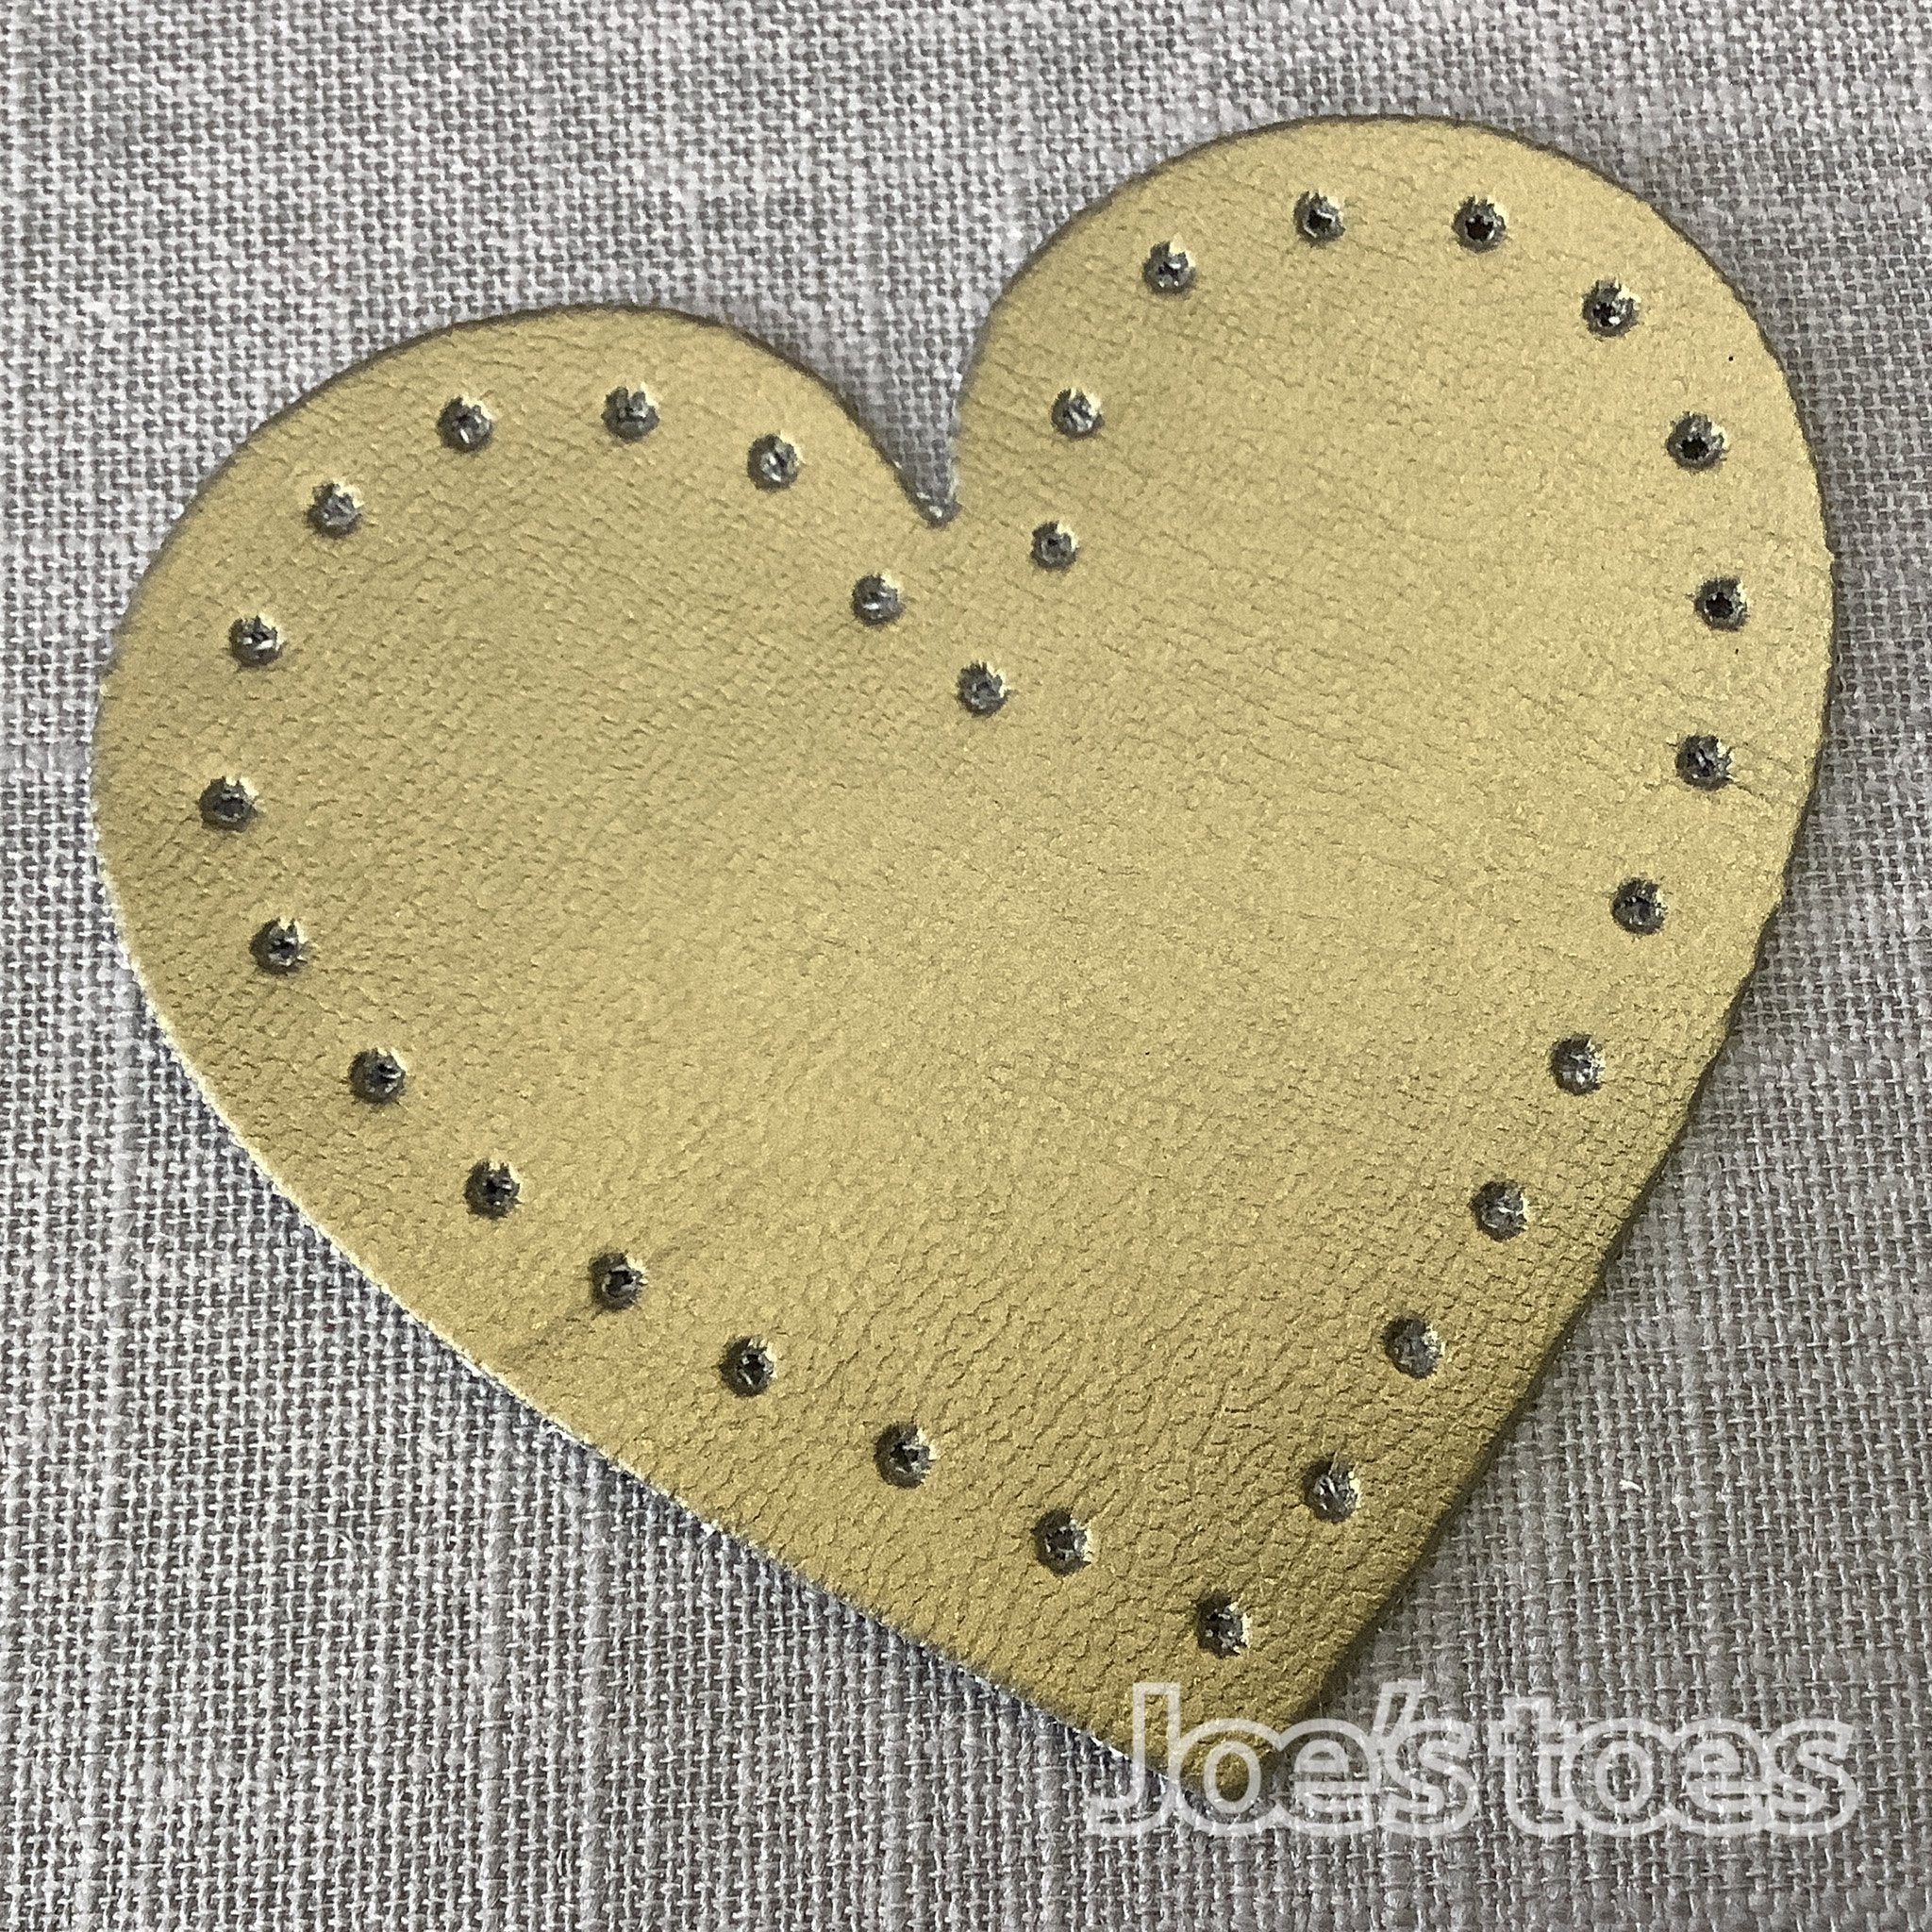 Joe's Toes heart shape sew-on patches with punched holes for easy